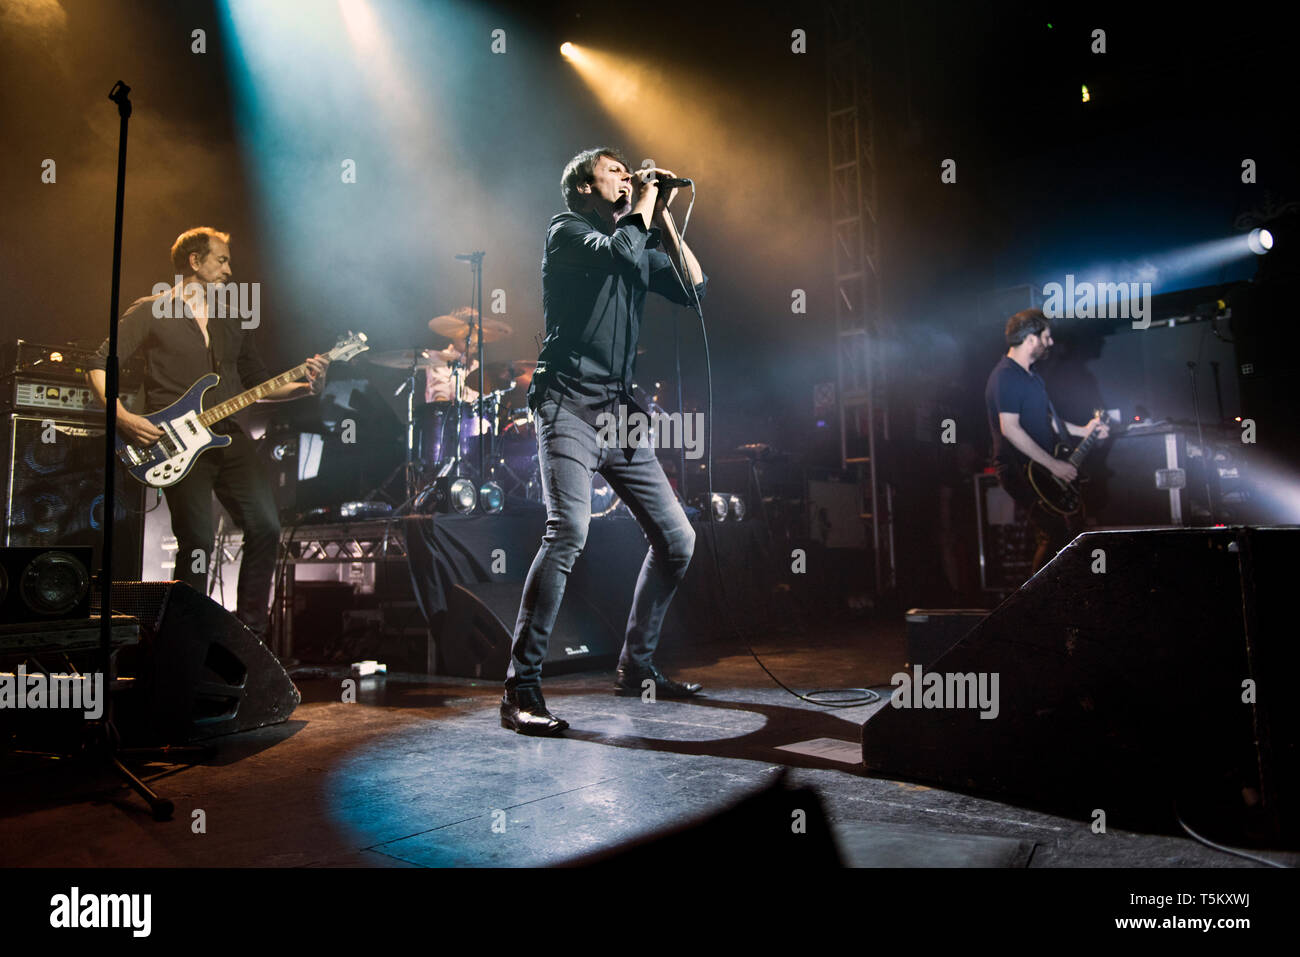 Leeds, UK. 24th Apr 2019. Veteran indie rock band Suede in concert at the O2 Academy, Leeds, UK, 24th April 2019. Singer-song-writer Brett Anderson fronts the band. Credit: John Bentley/Alamy Live News Stock Photo